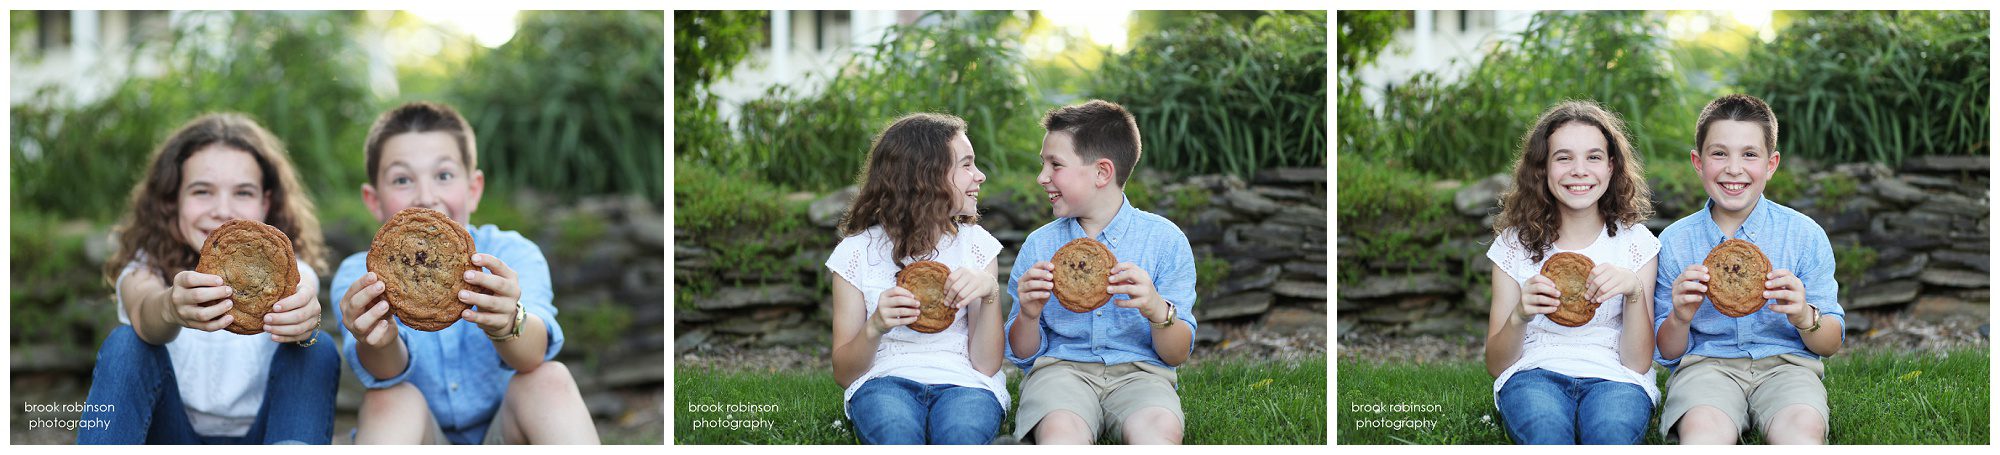 charlottesville family portraits clifton inn albemarle county central virginia summer spring siblings parents pictures photographer cookies chocolate chip 